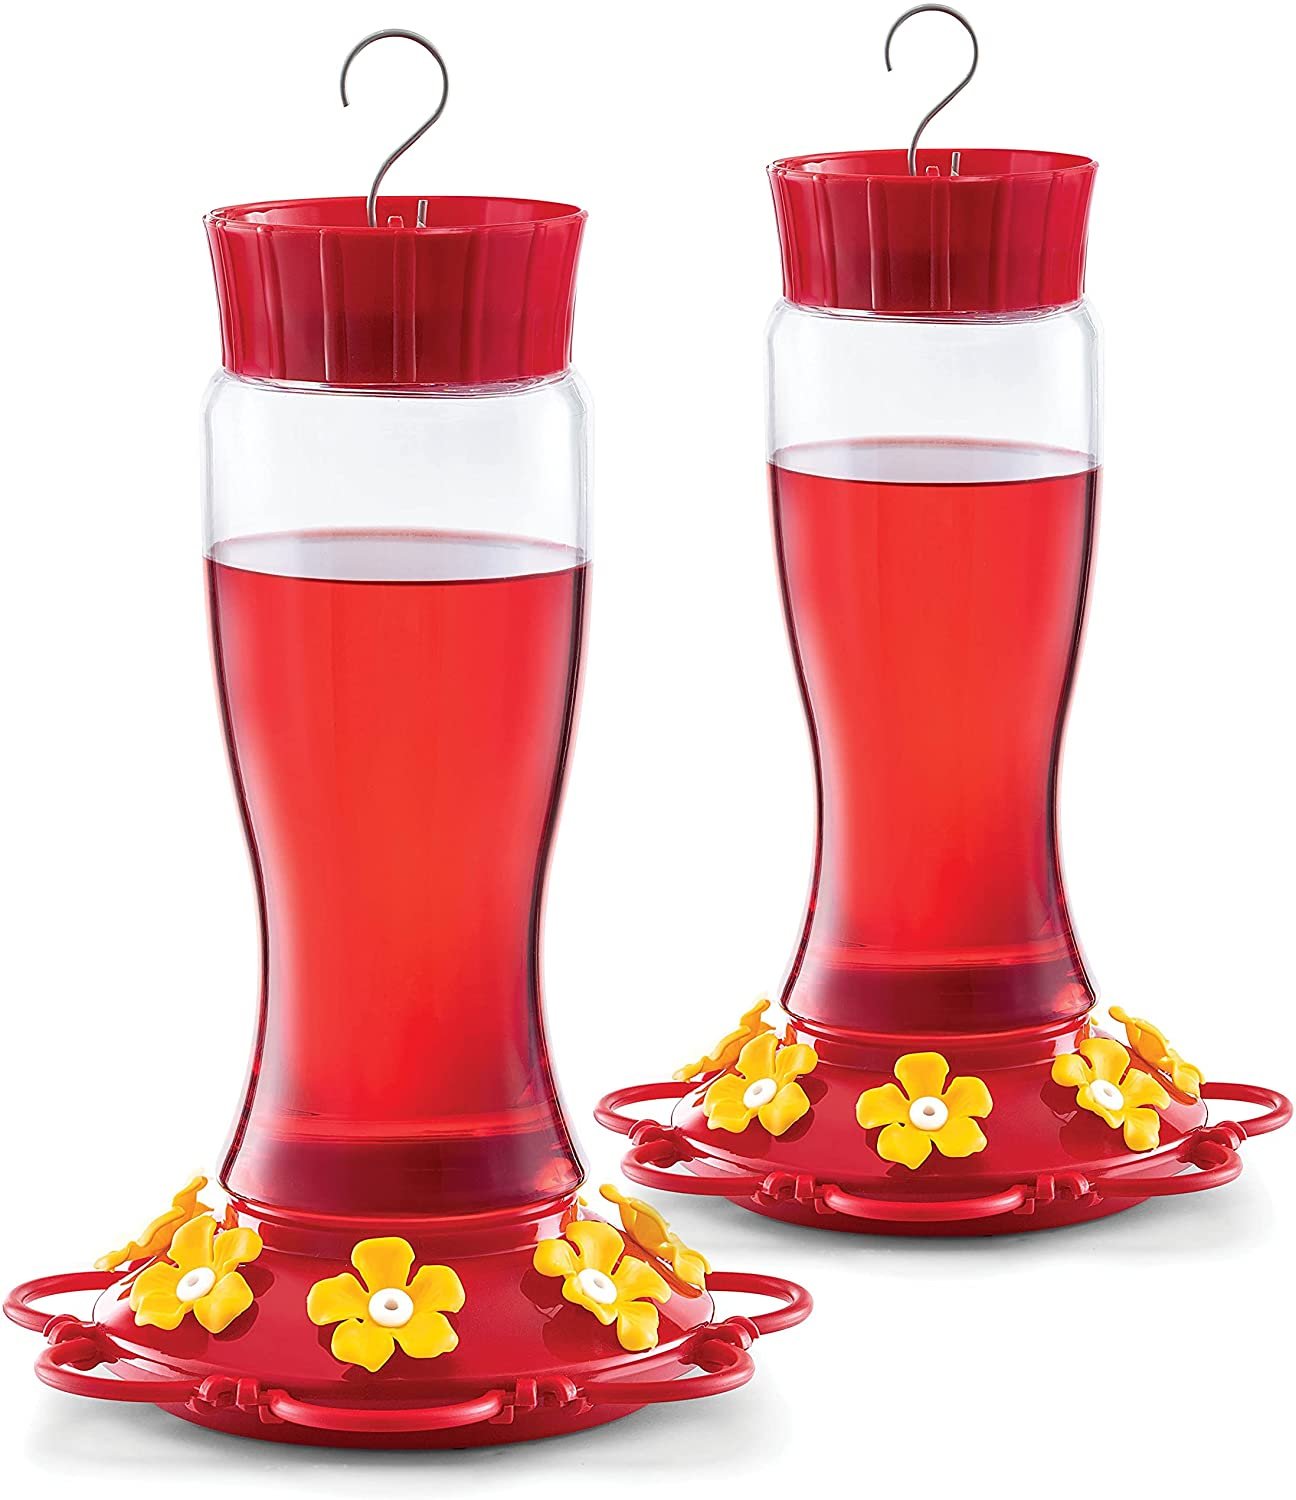 SEWANTA 30oz Red Hummingbird Feeder Set of 2 - Built-in Ant Guard, 7 Feeding Ports, Easy Filling/Cleaning